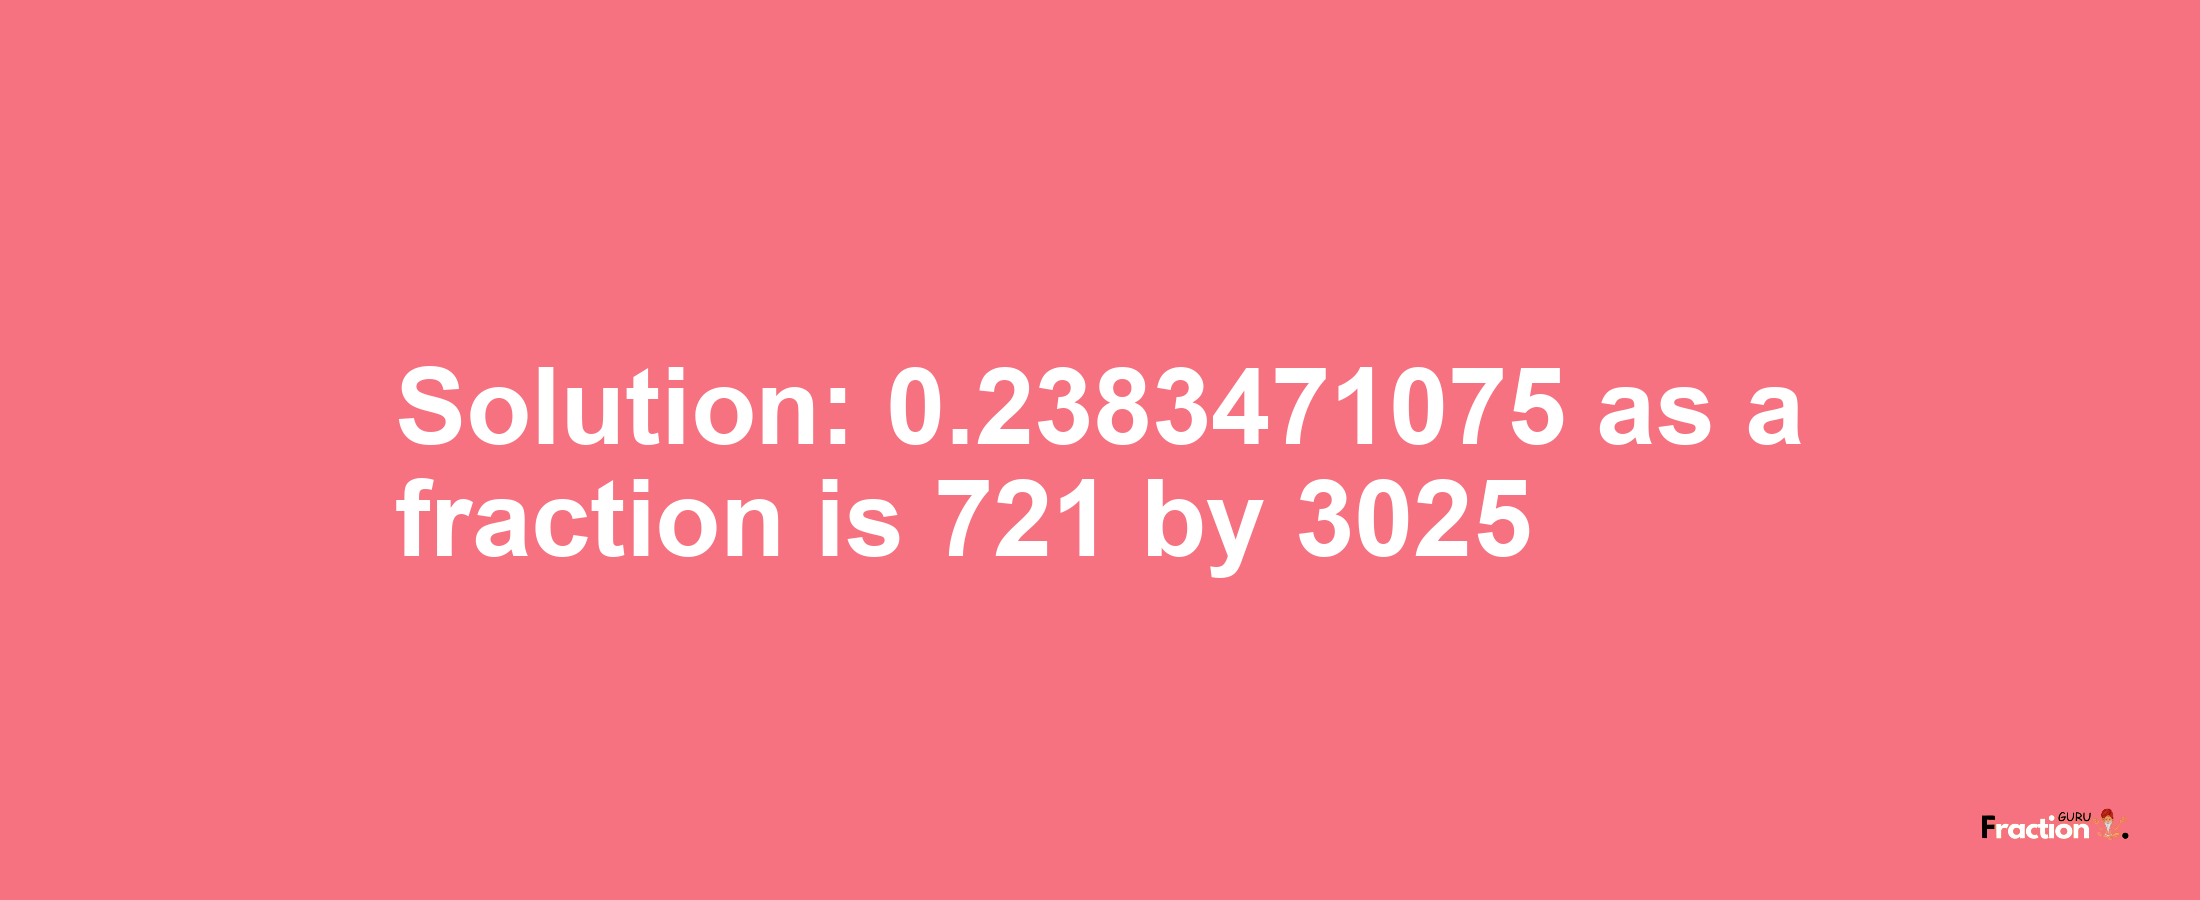 Solution:0.2383471075 as a fraction is 721/3025